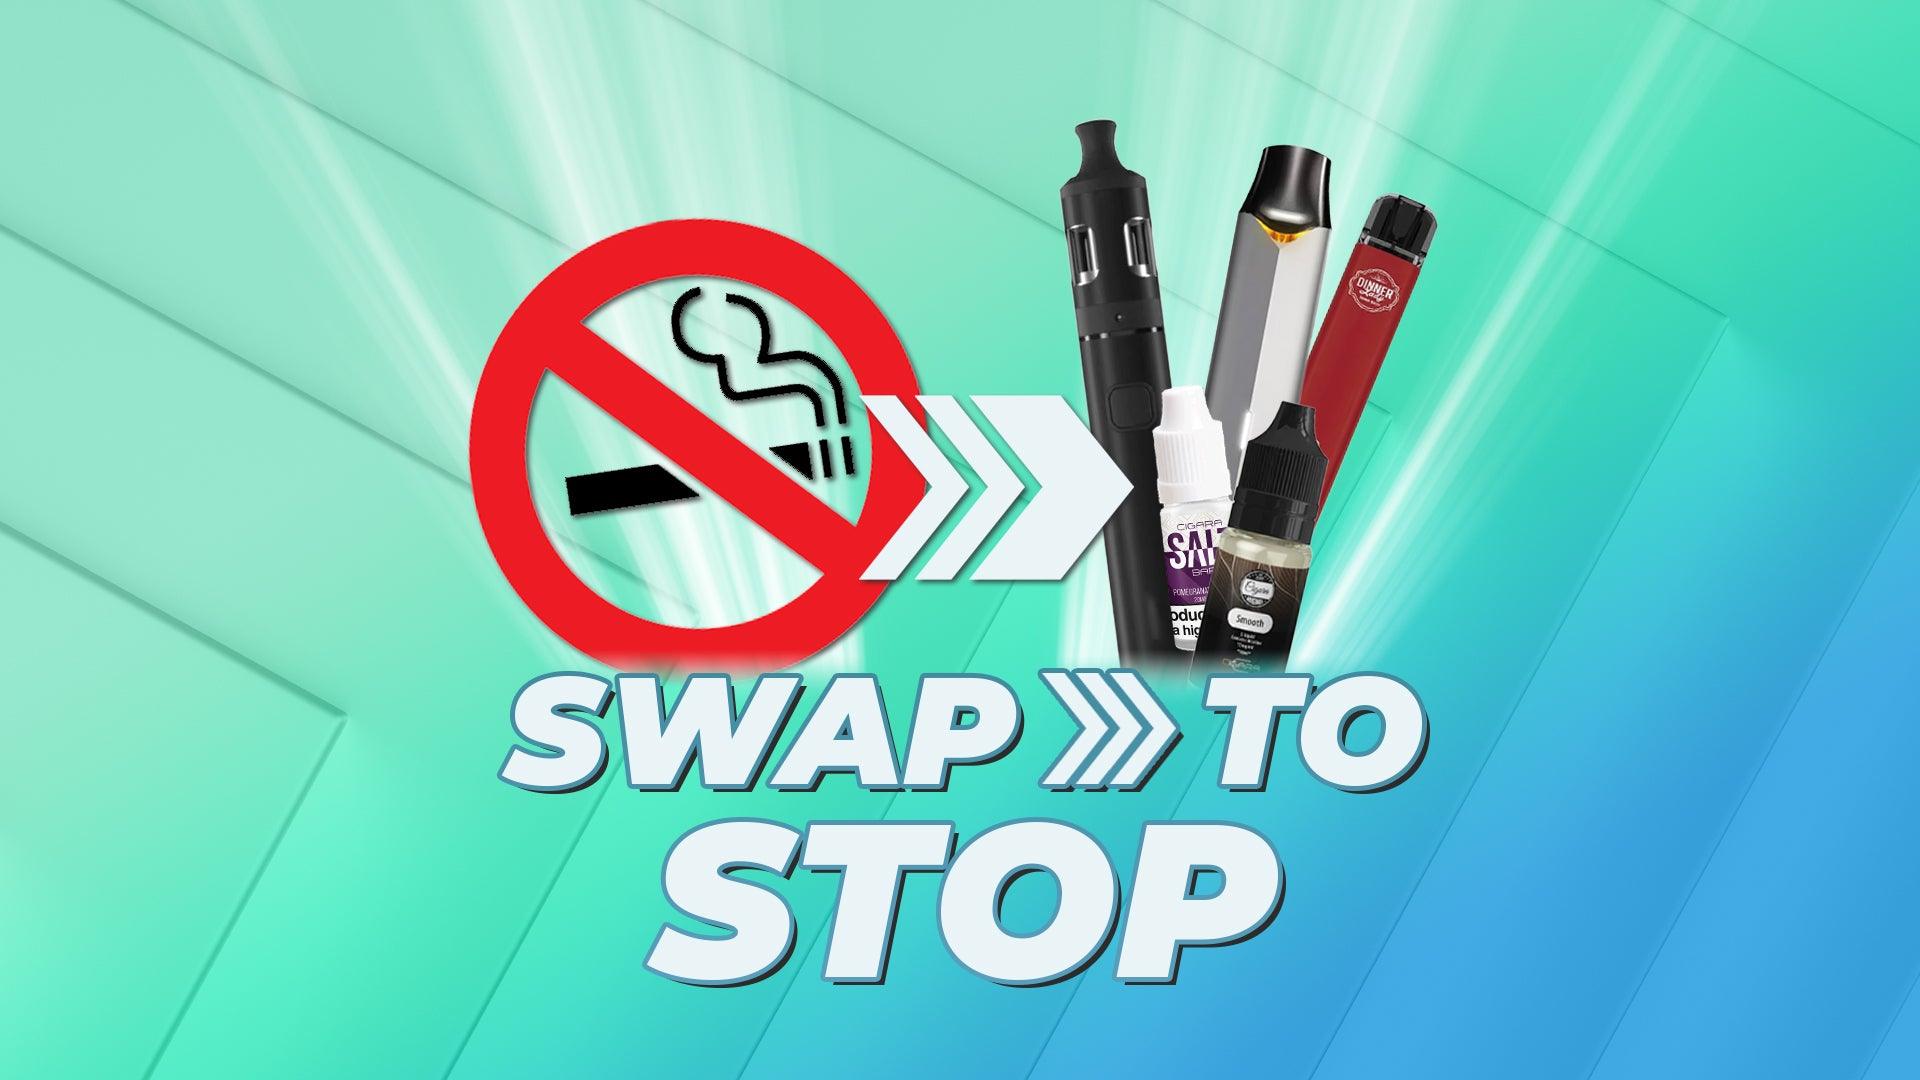 Swap To Stop Campaign - Category:Health, Sub Category:Quit Smoking